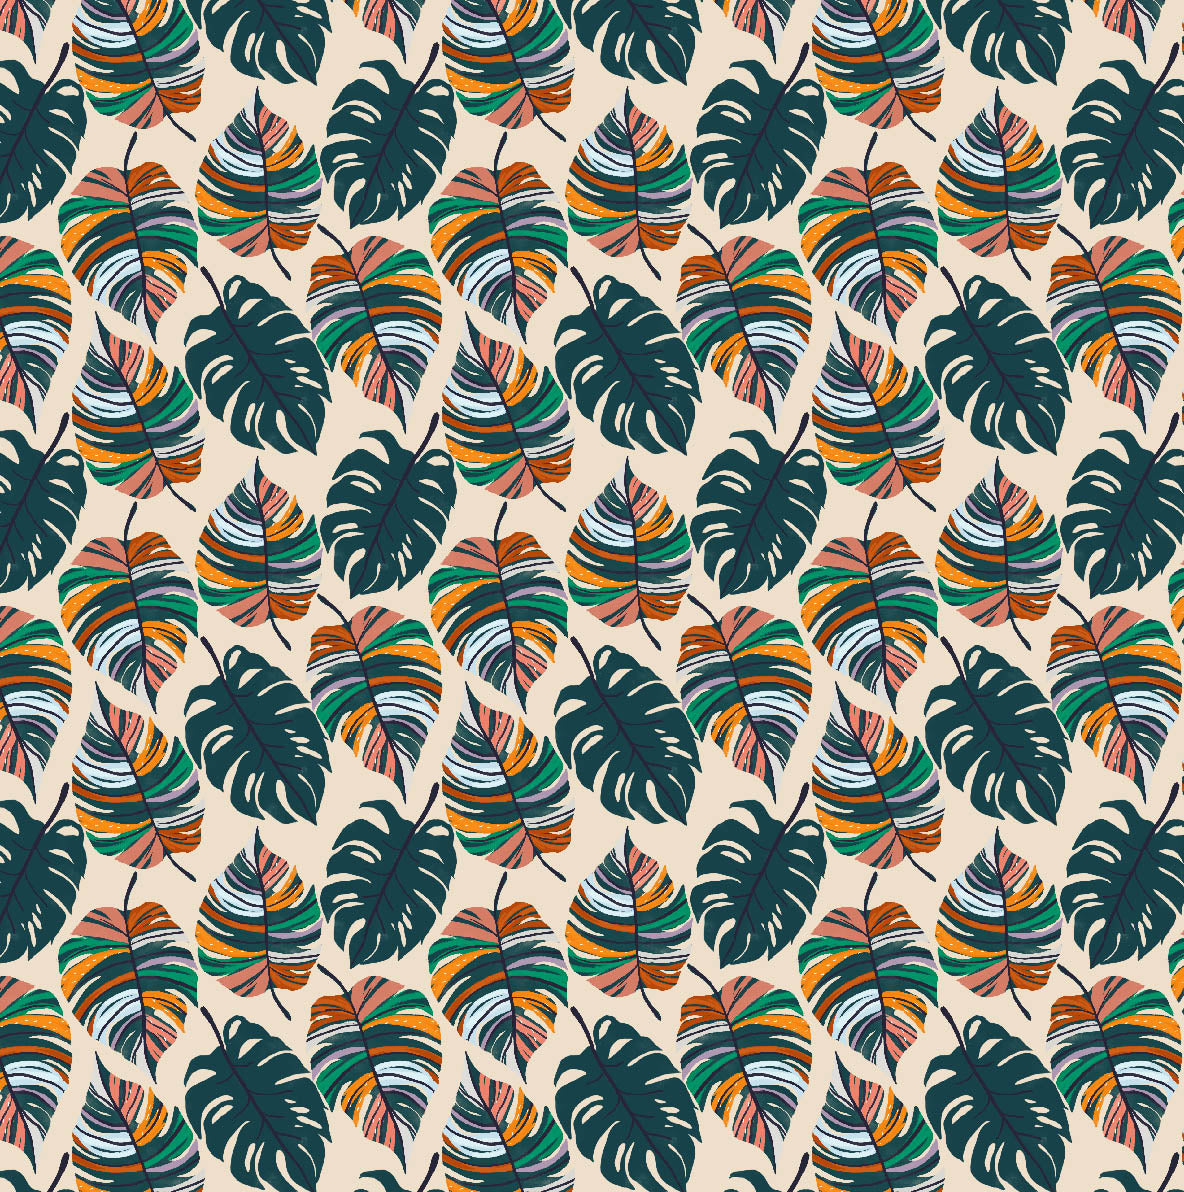 Summer Monstera Botanical by Samantha Marie - 2-5 day turnaround - Order by 1/2 yard; Description of bases below